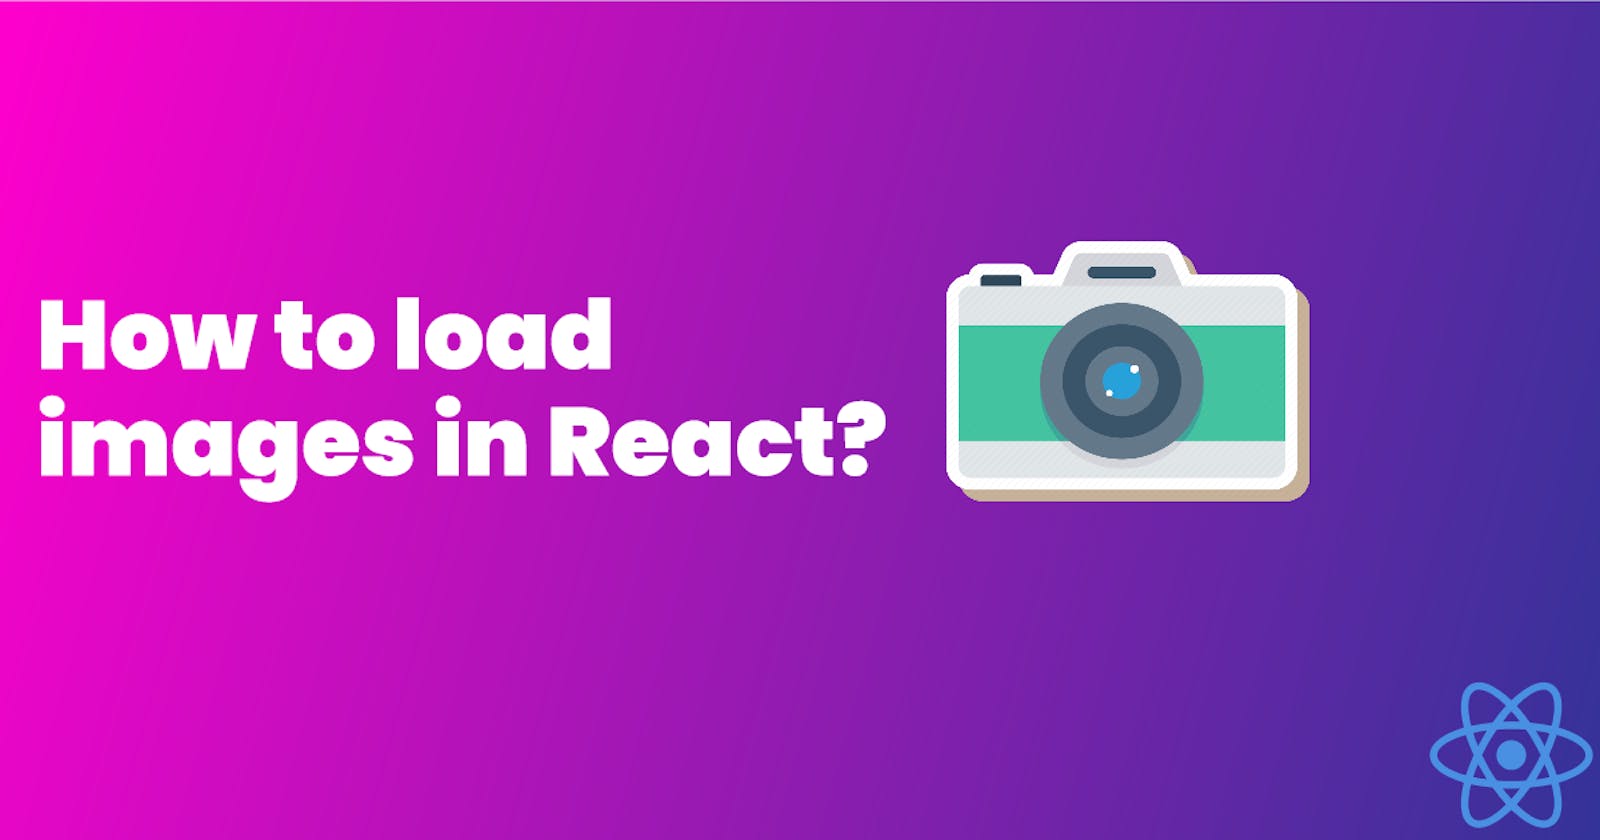 How to load images in React?